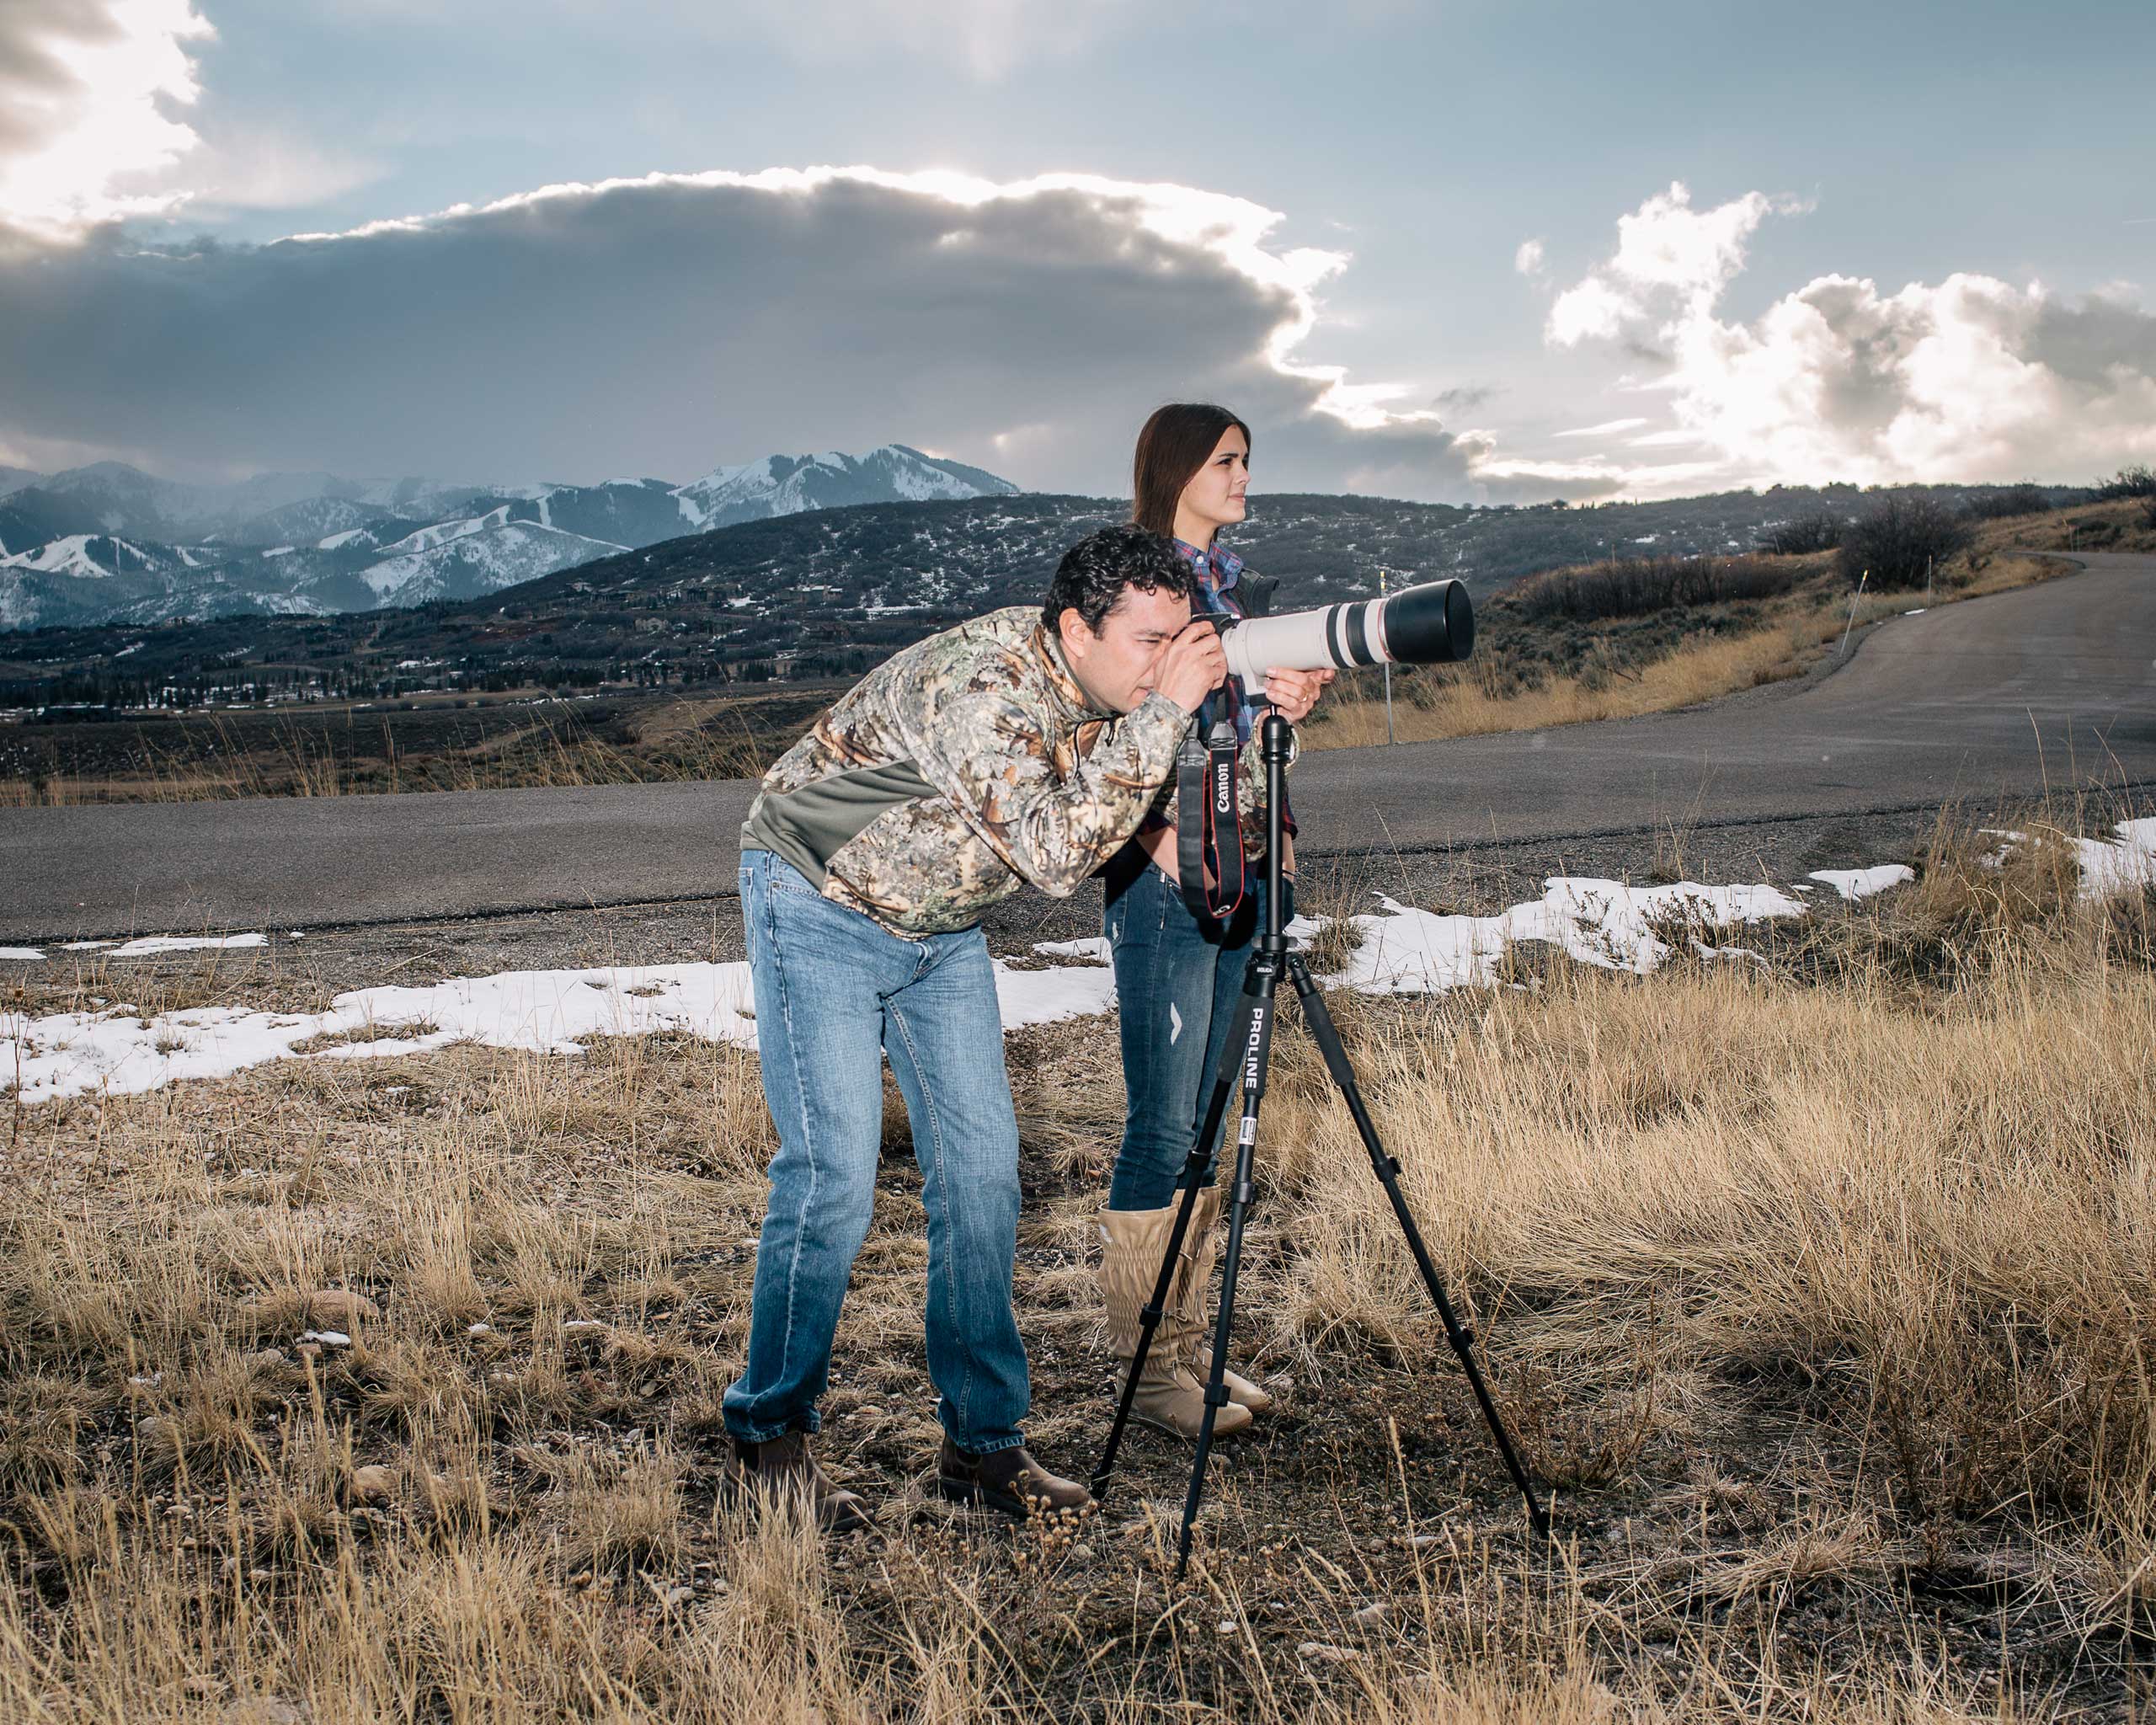 When in Utah, Chaffetz likes to photograph wildlife with his 14-year-old daughter Kate